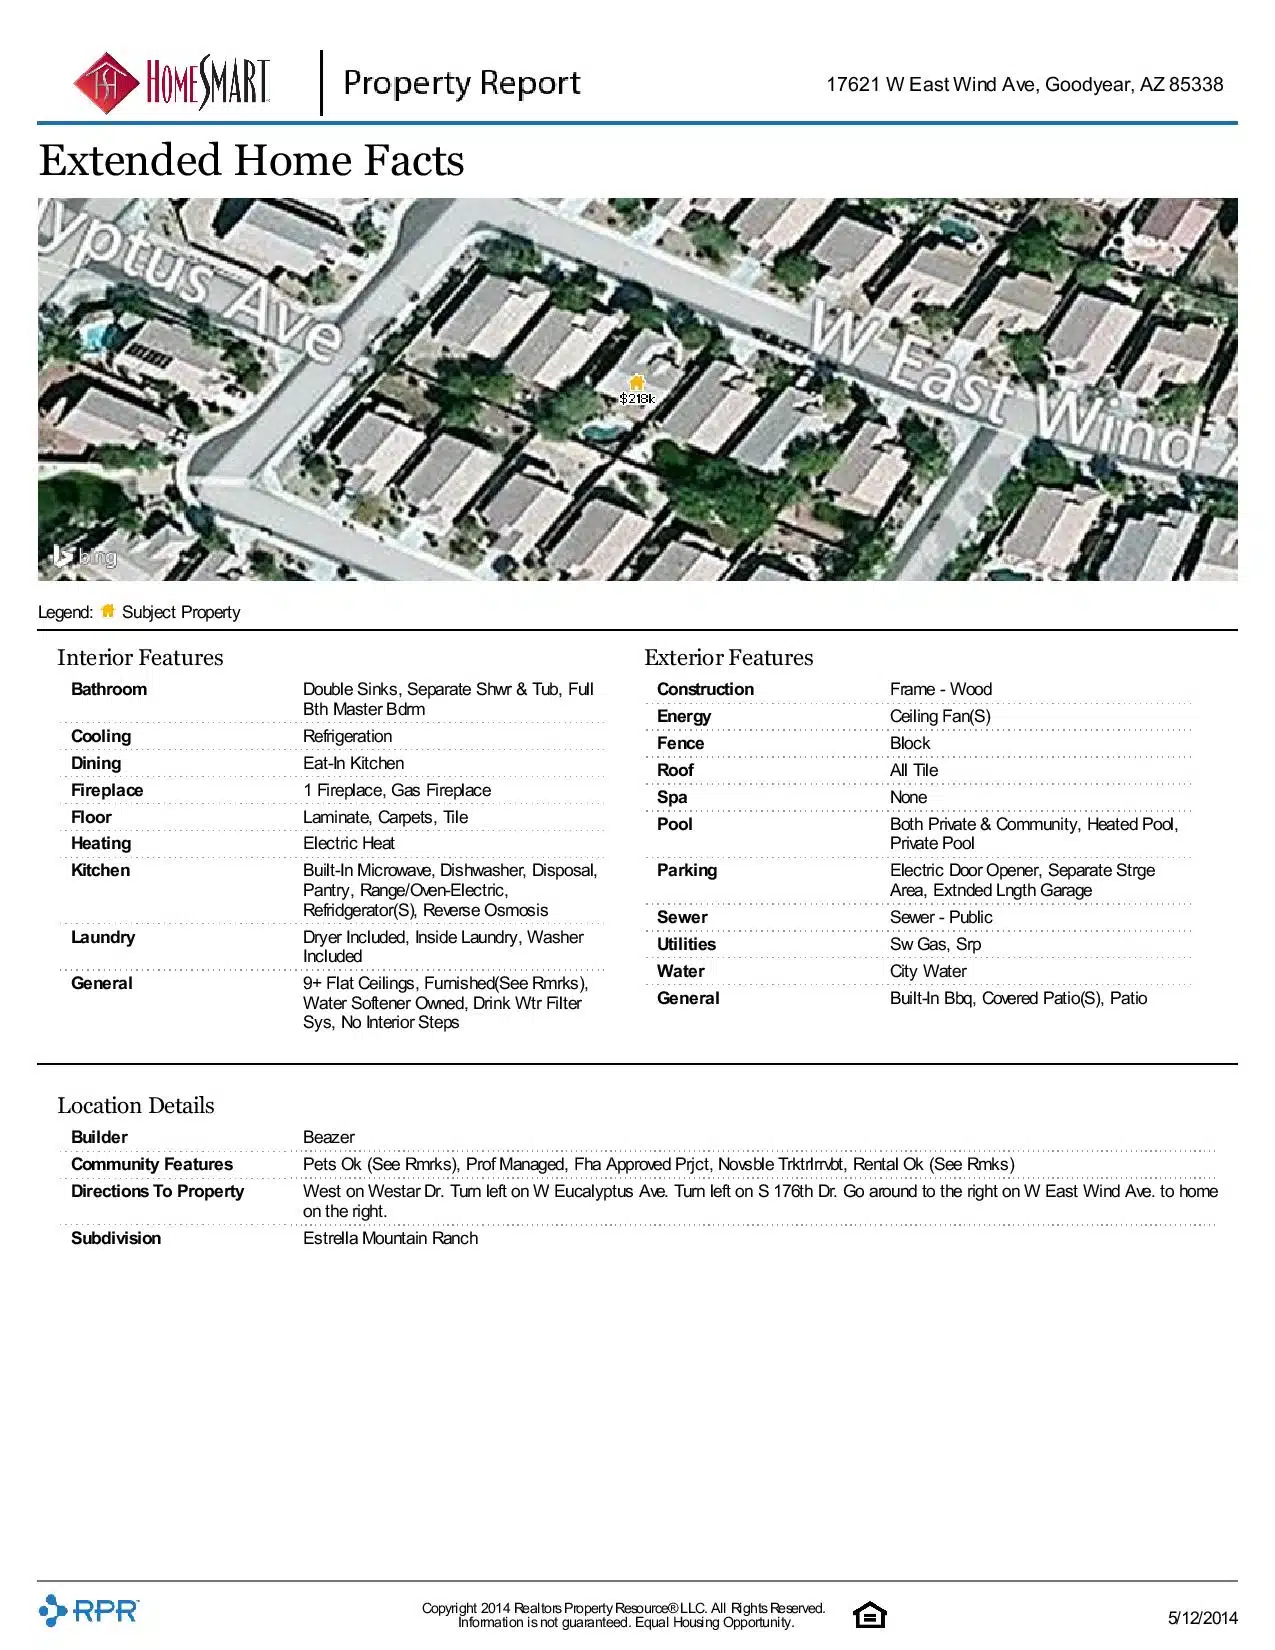 17621-W-East-Wind-Ave-Goodyear-AZ-85338-page-004